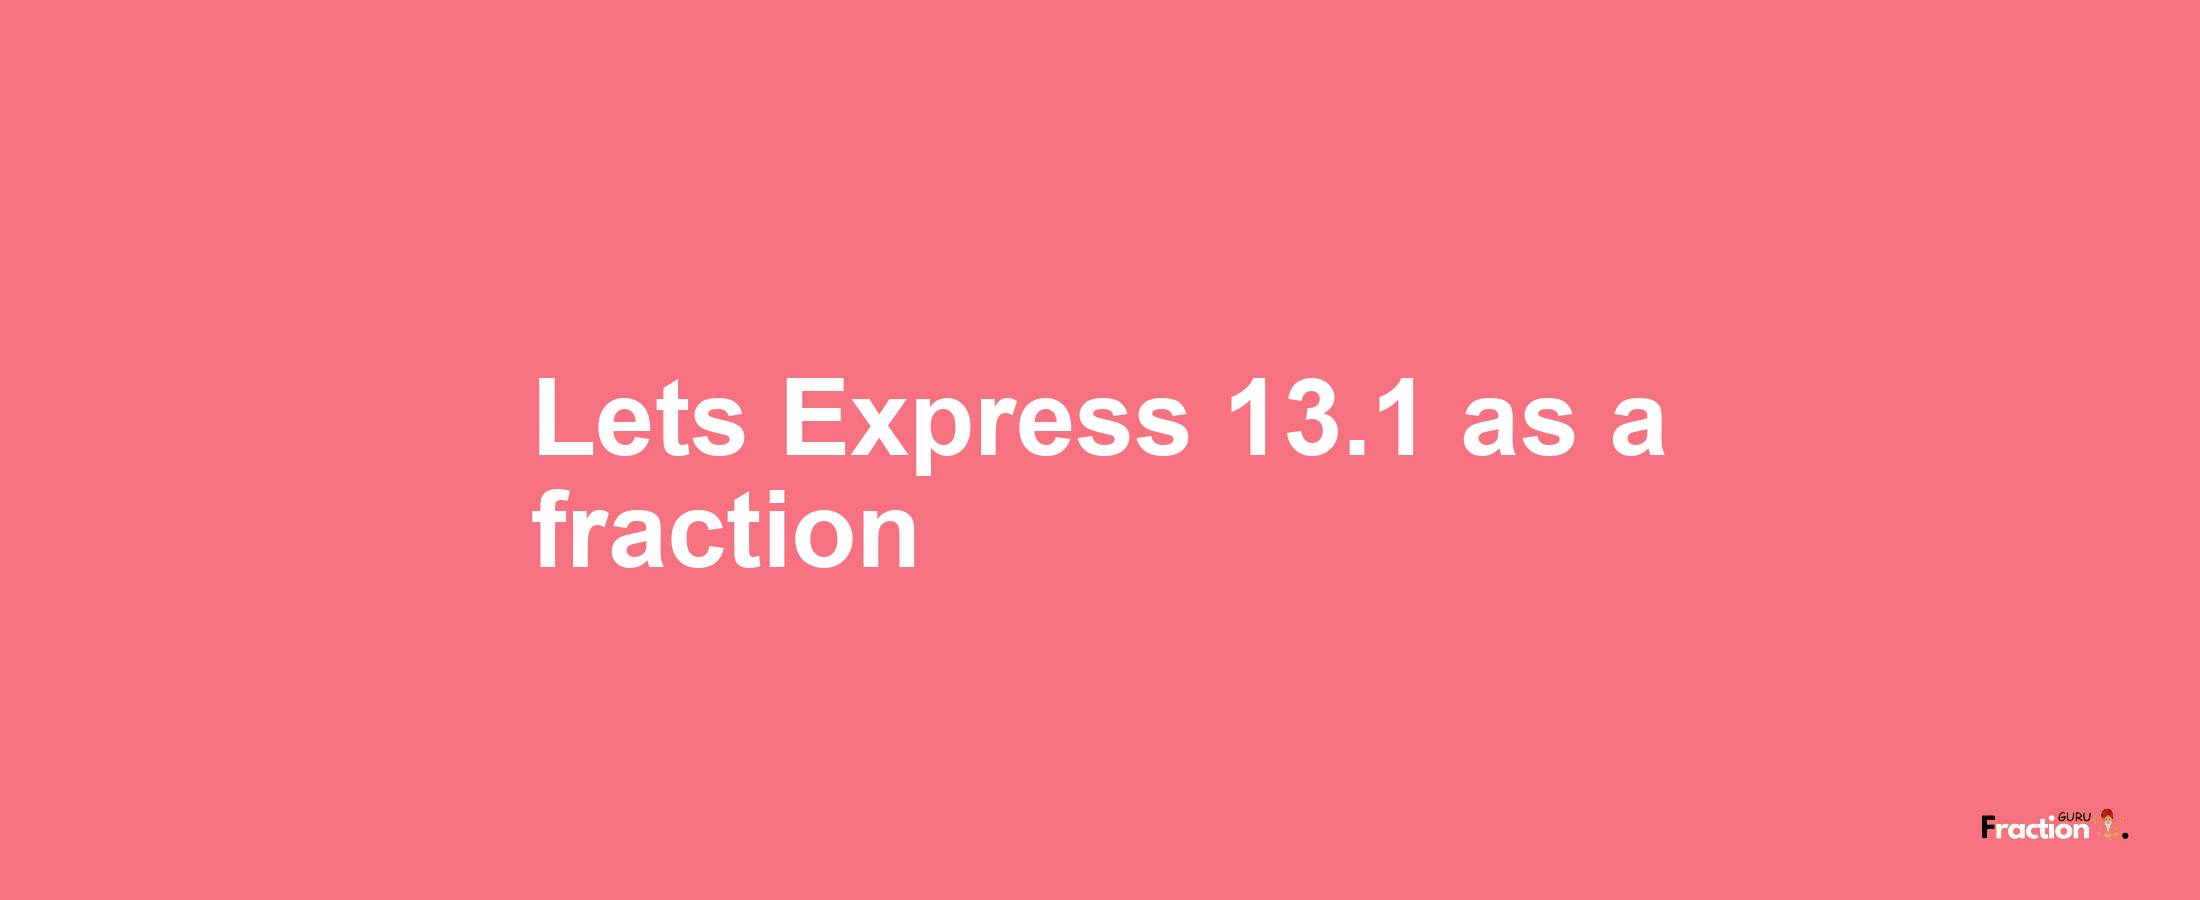 Lets Express 13.1 as afraction